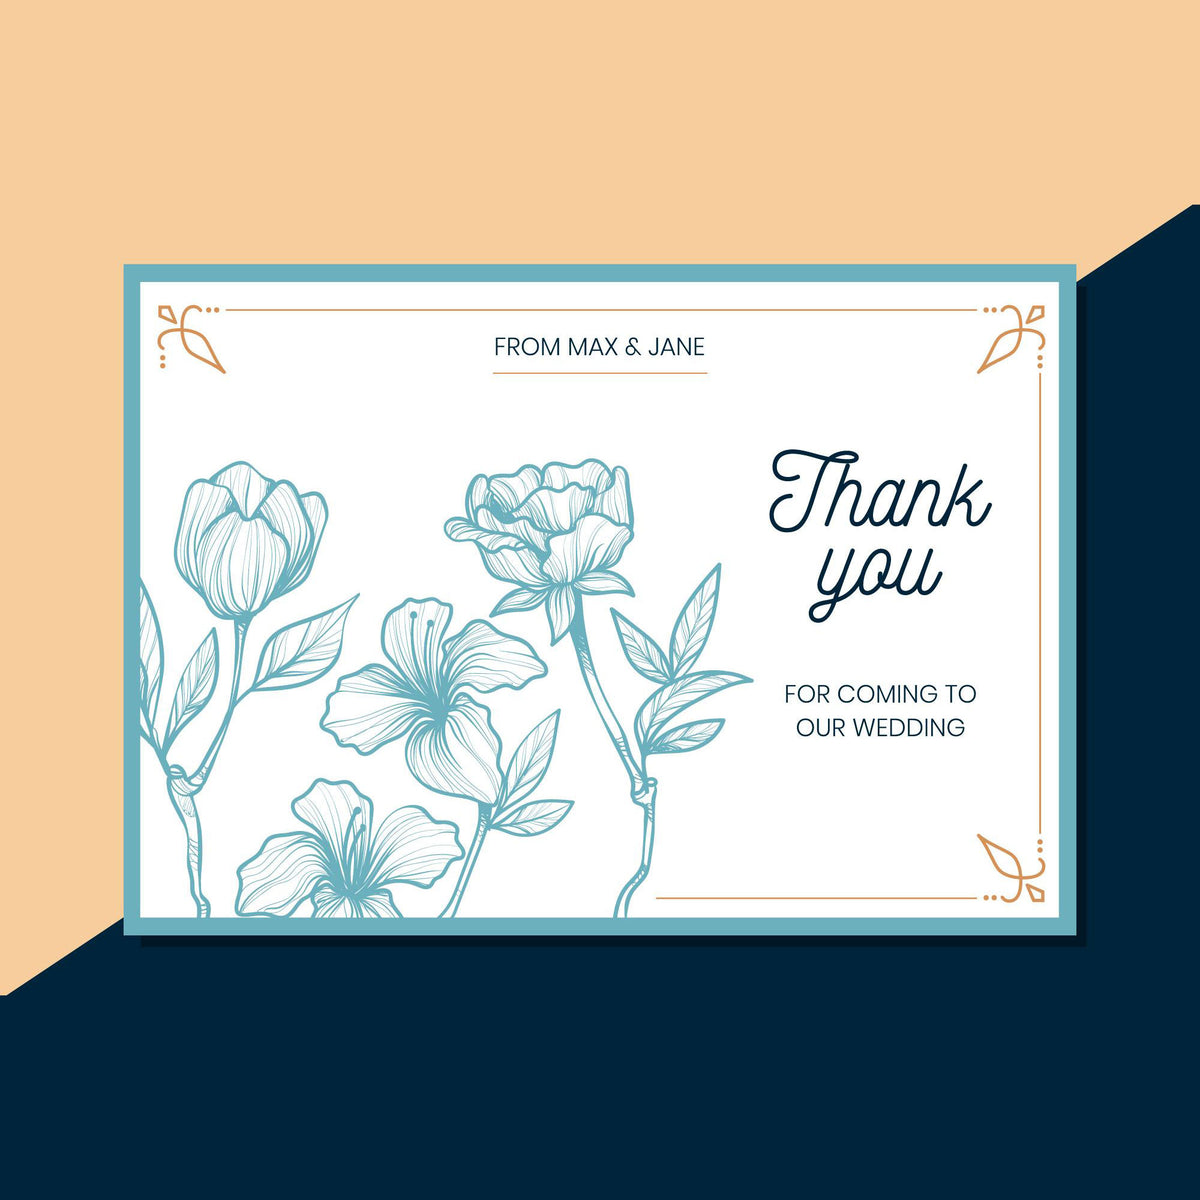 Plantable Blue Bells Thank You Card - Set of 100 cards